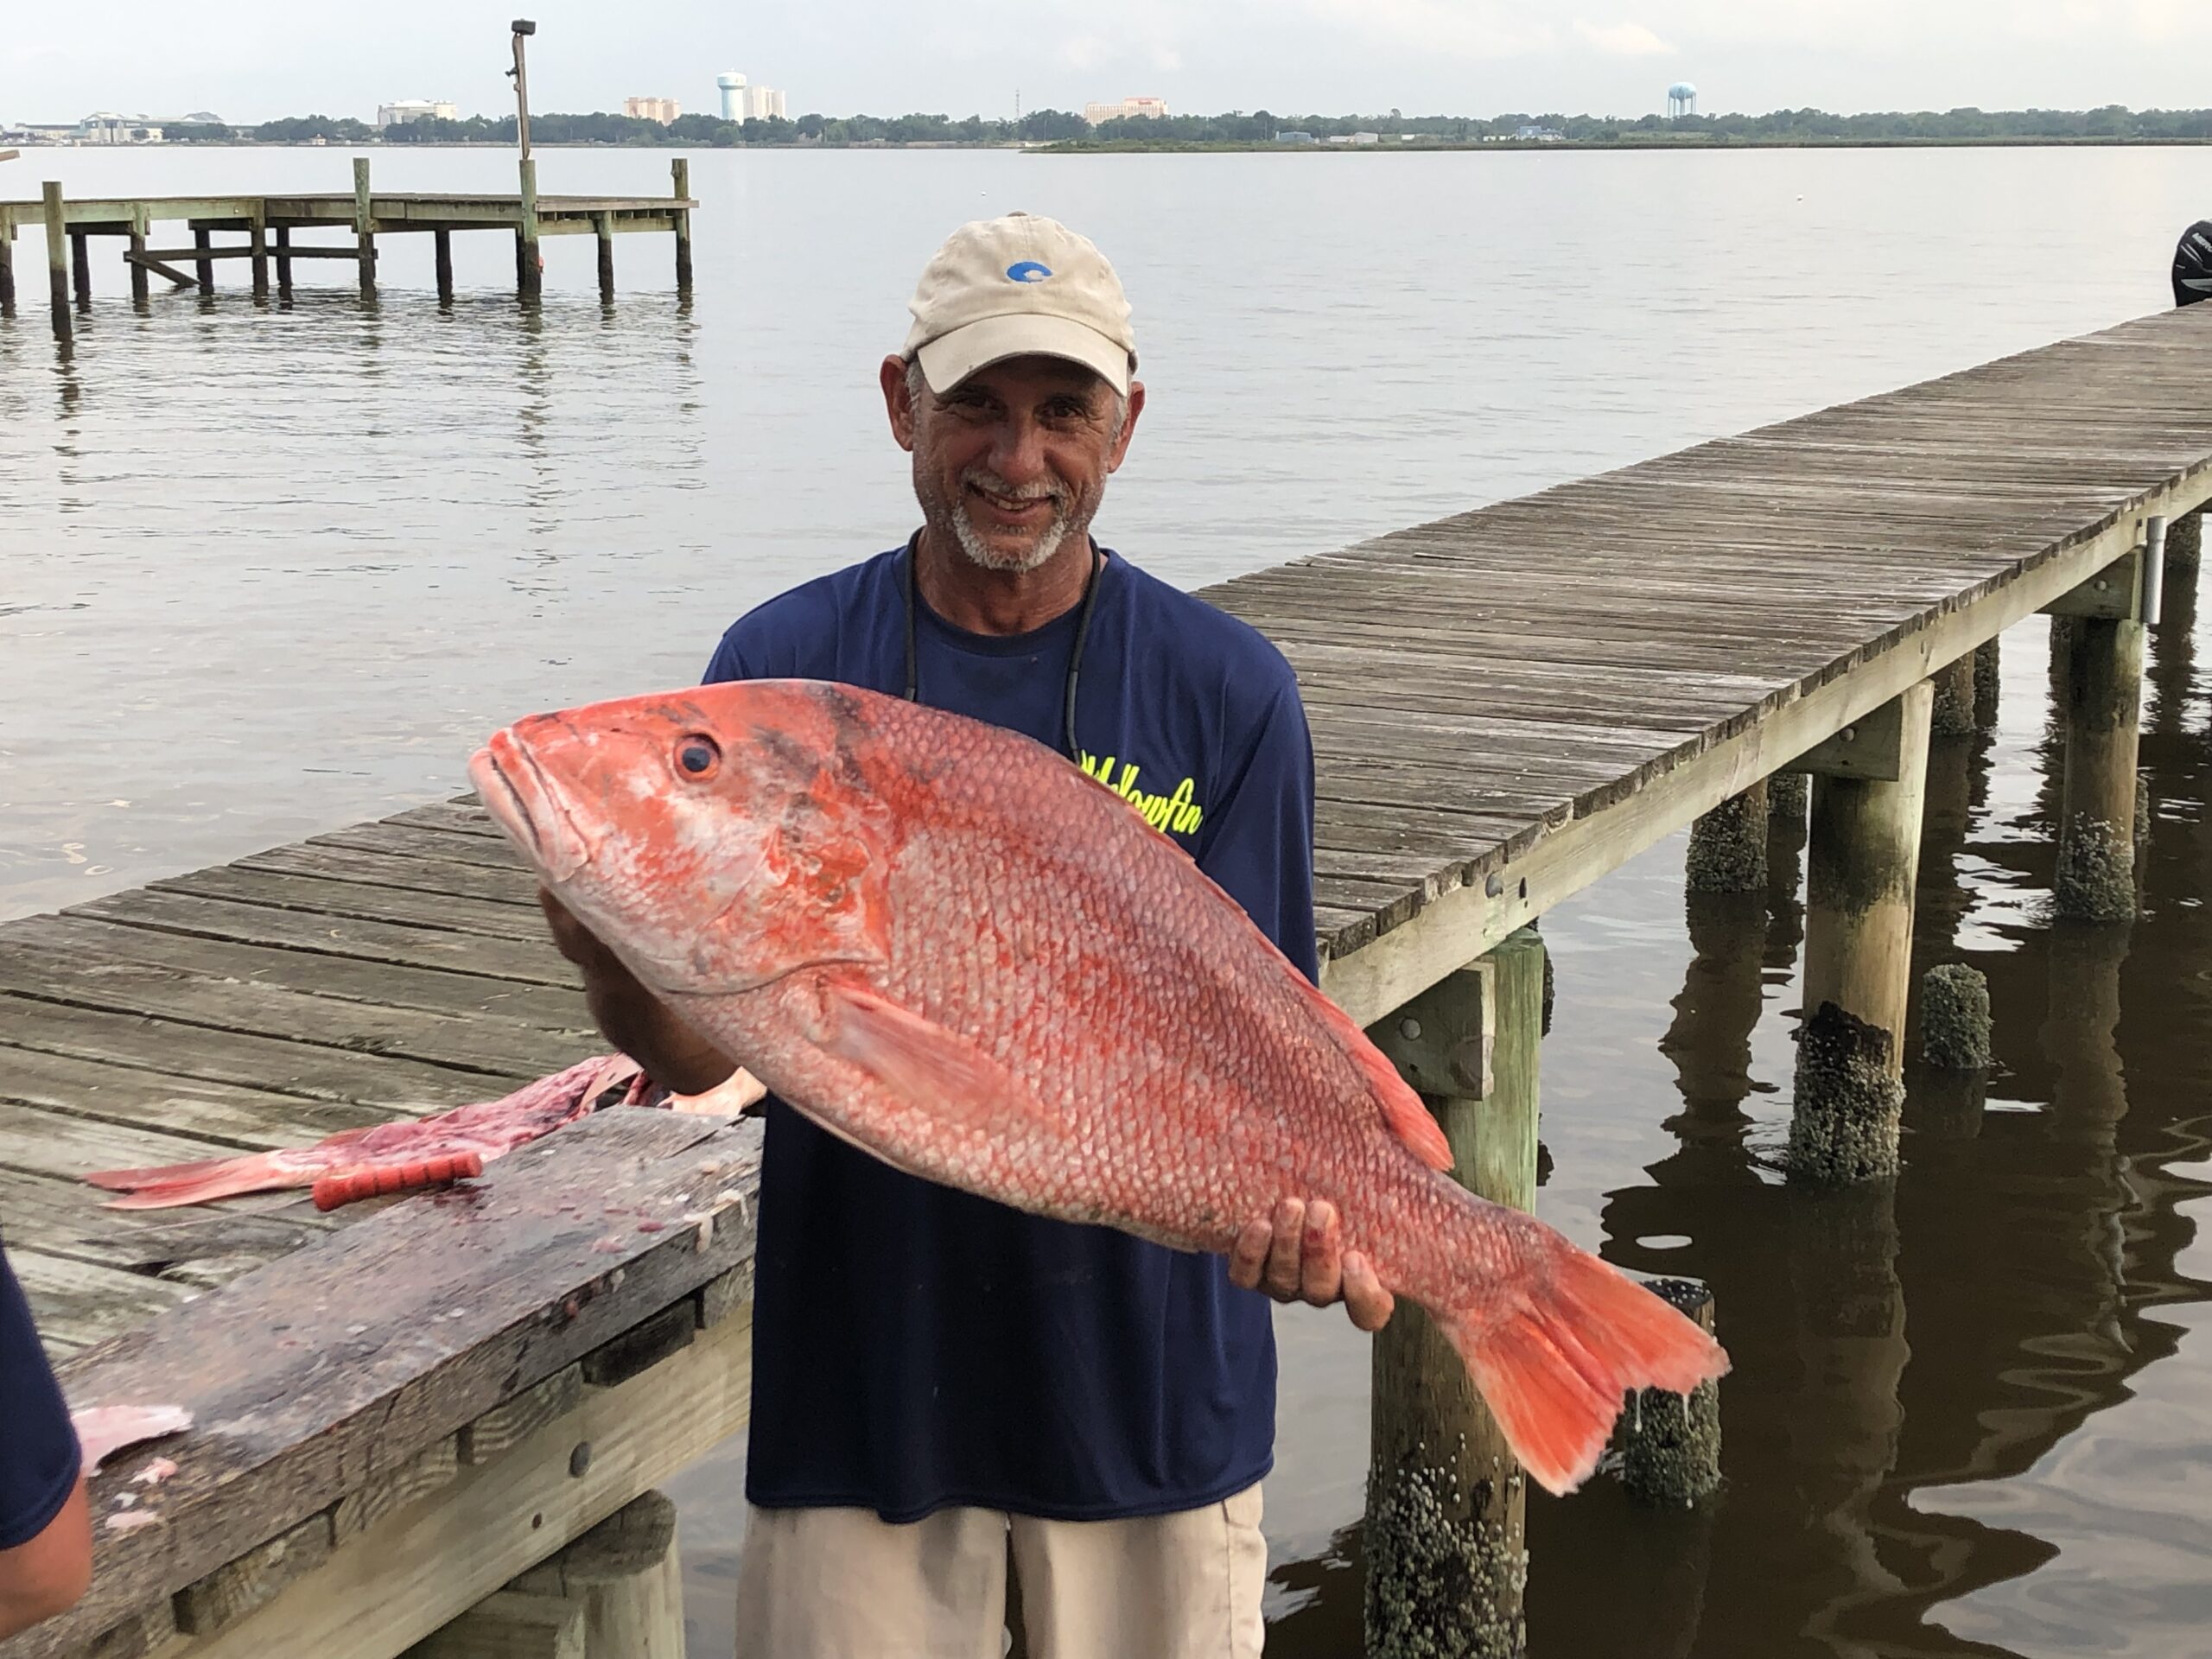 Red snapper seasons and limits continue to be debated with no end in sight.